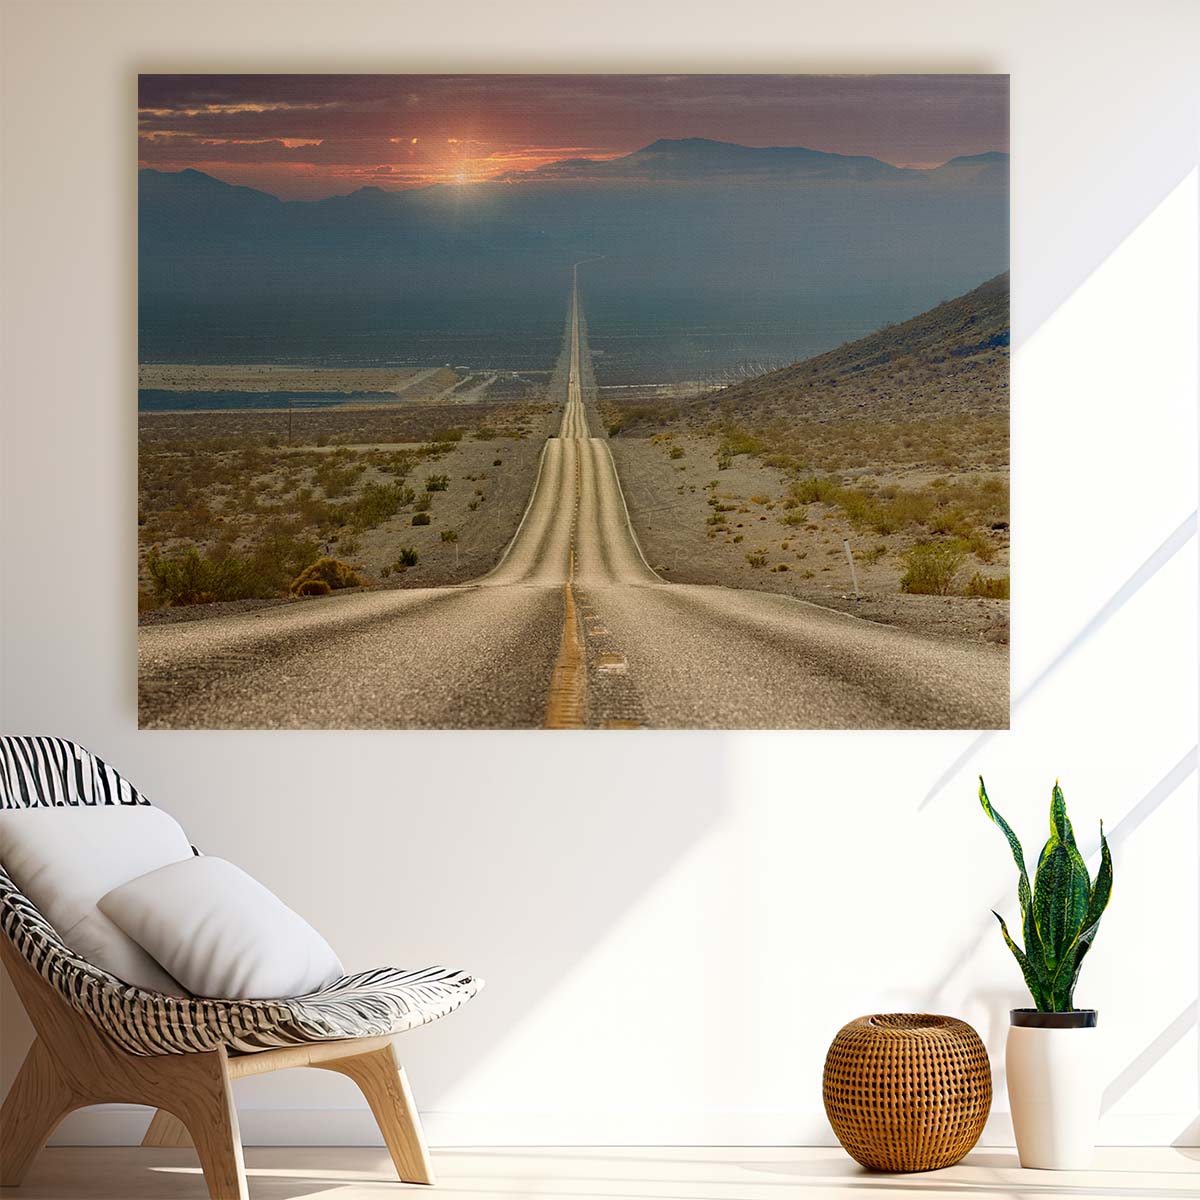 Sunset Drive in Mojave Desert Landscape Wall Art by Luxuriance Designs. Made in USA.